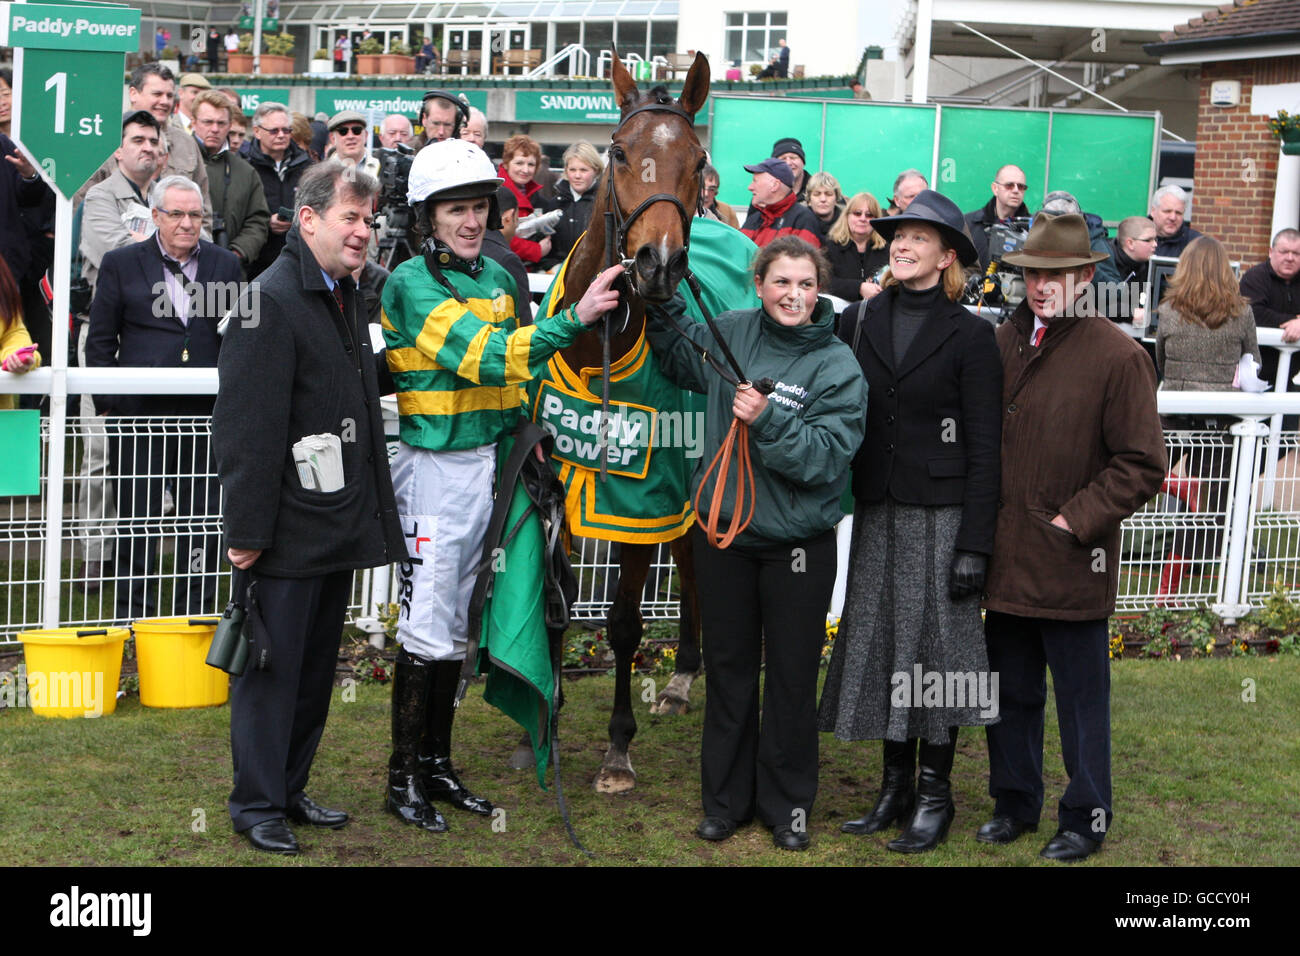 (left to right) Owner John P McManus, jockey Tony McCoy and trainer Sarah Hobbs celebrate winning the Paddy Power Imperial Cup Handicap Hurdle on Qaspal Stock Photo